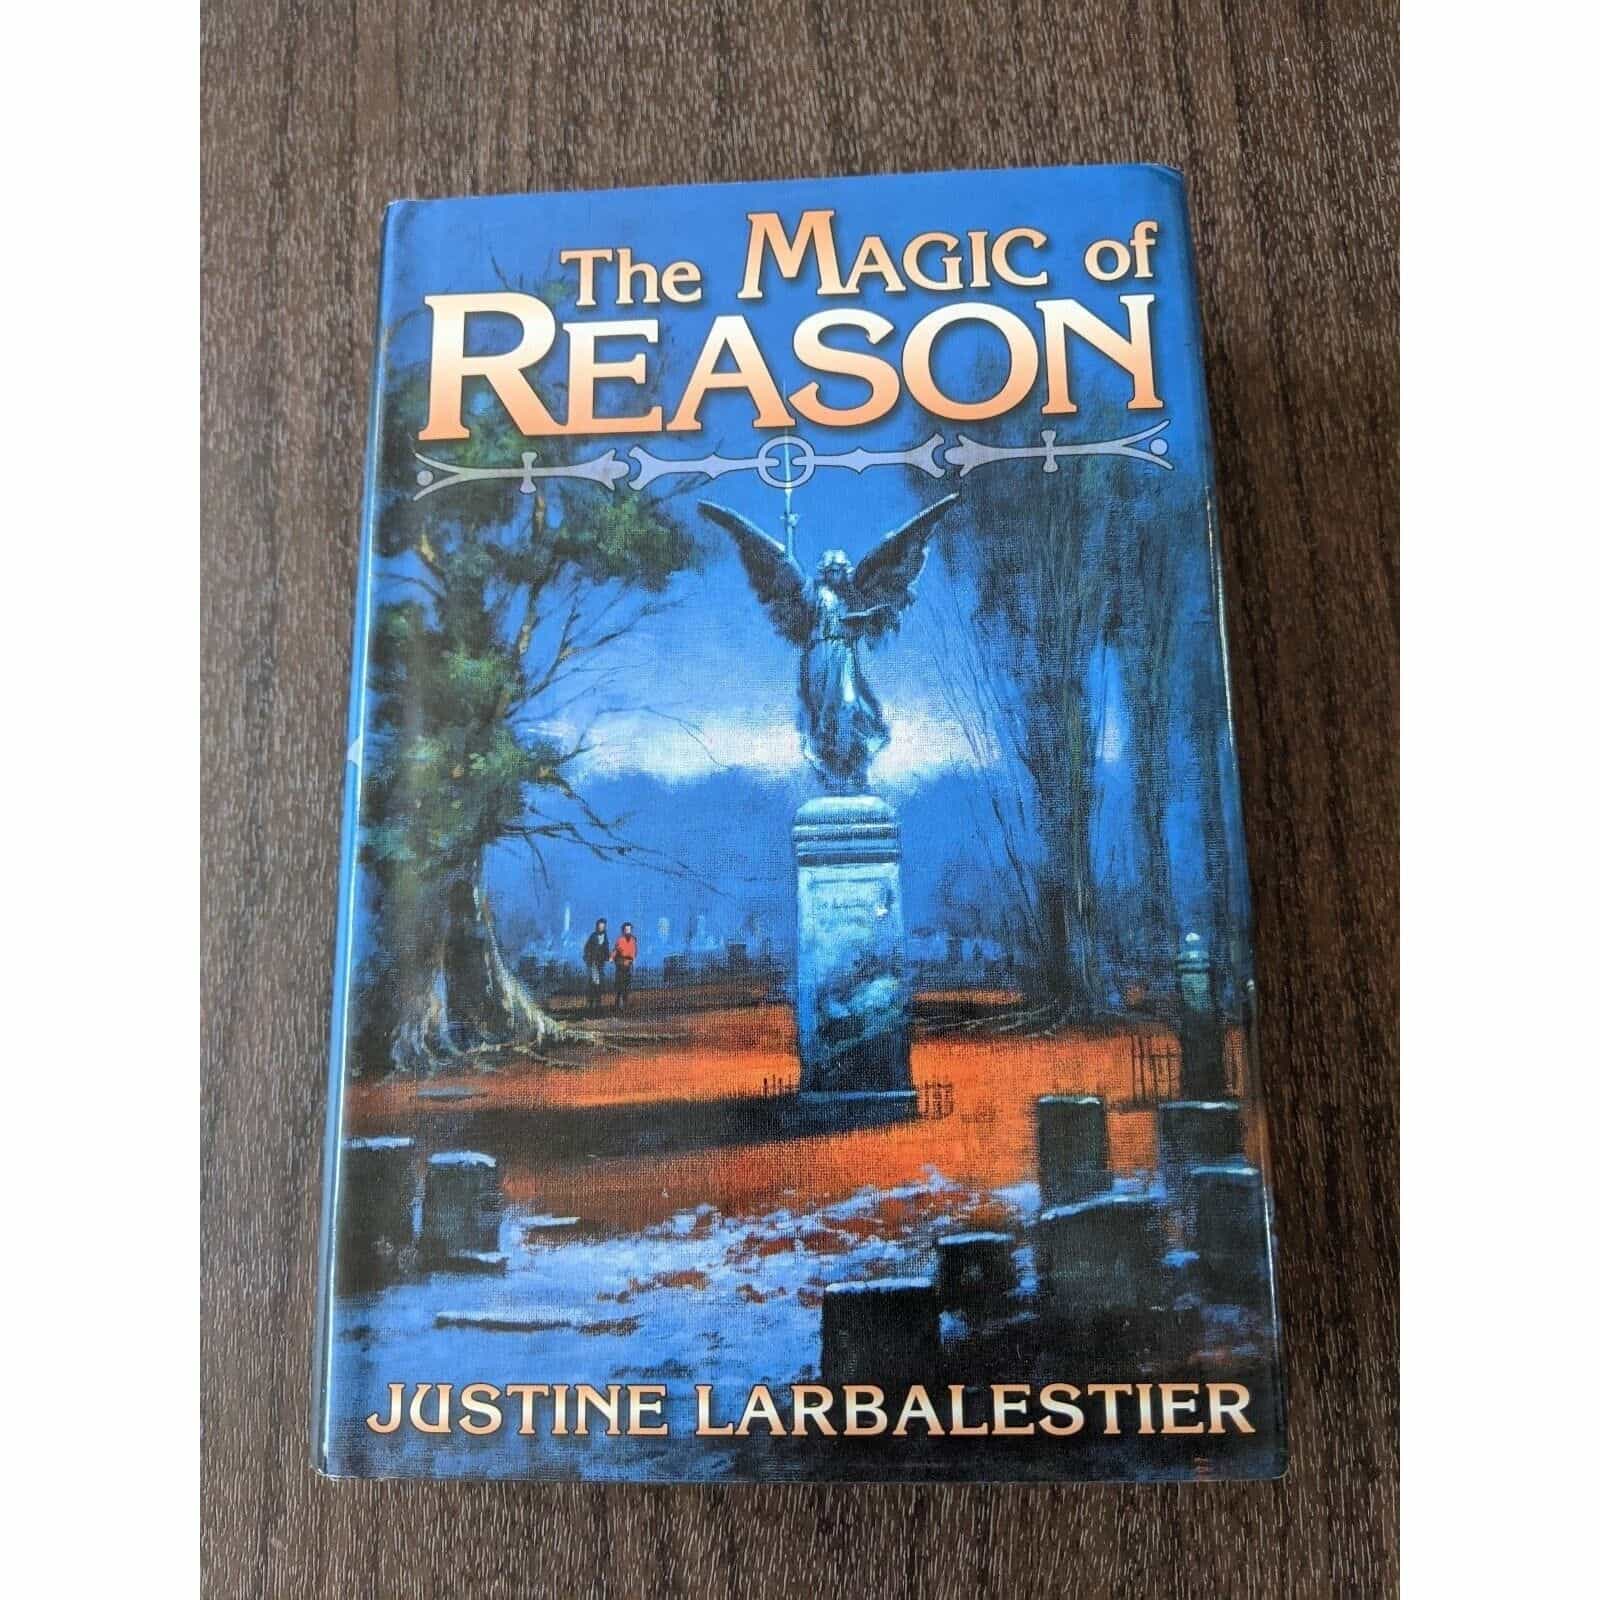 The Magic of Reason by Justine Larbalestier Book